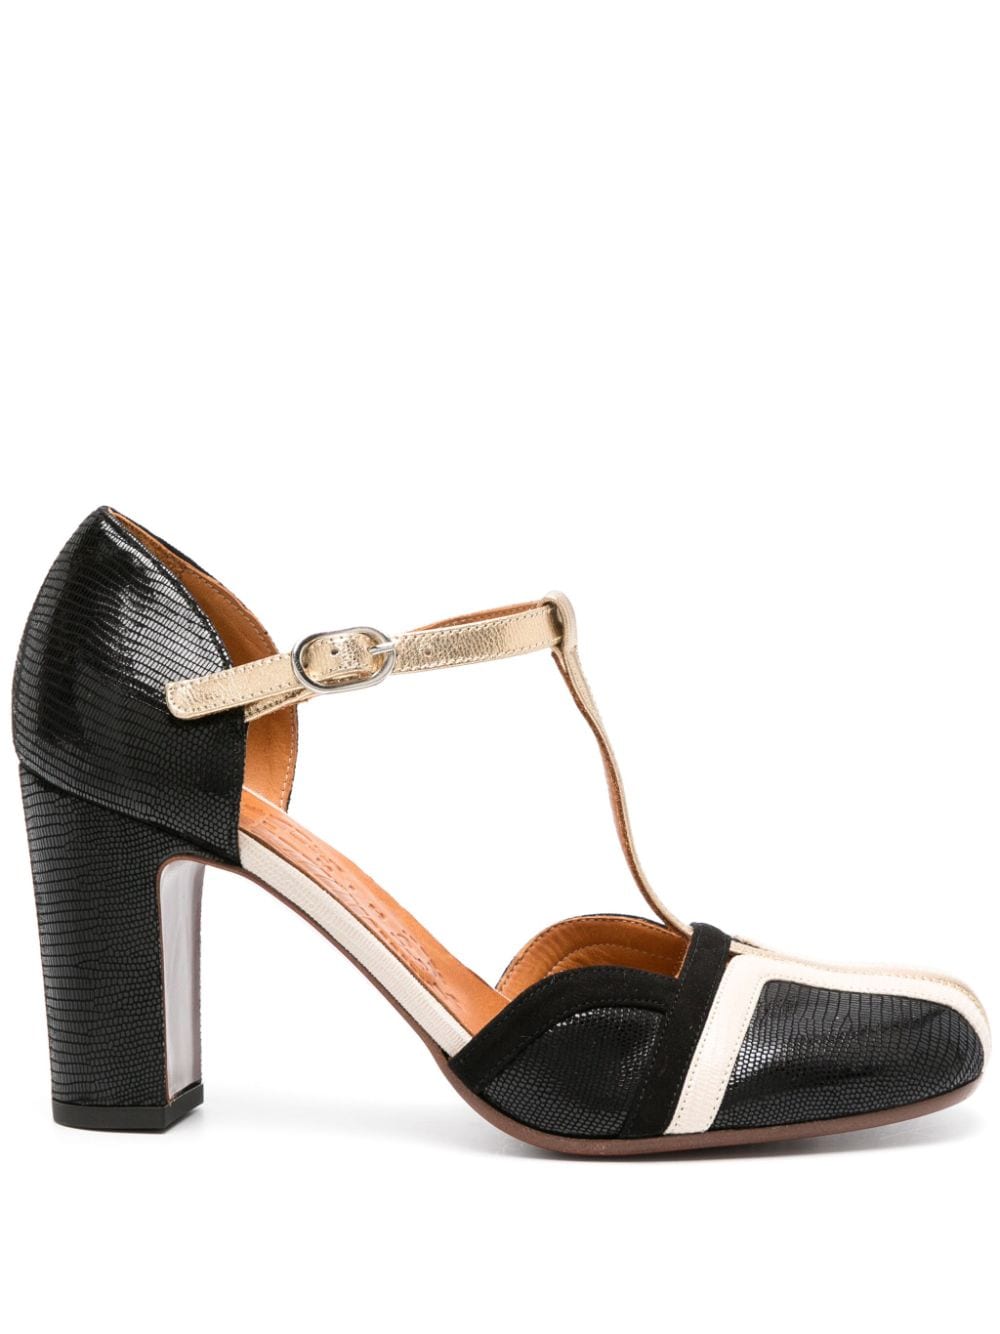 Chie Mihara Wander 80mm Leather Pumps In Black